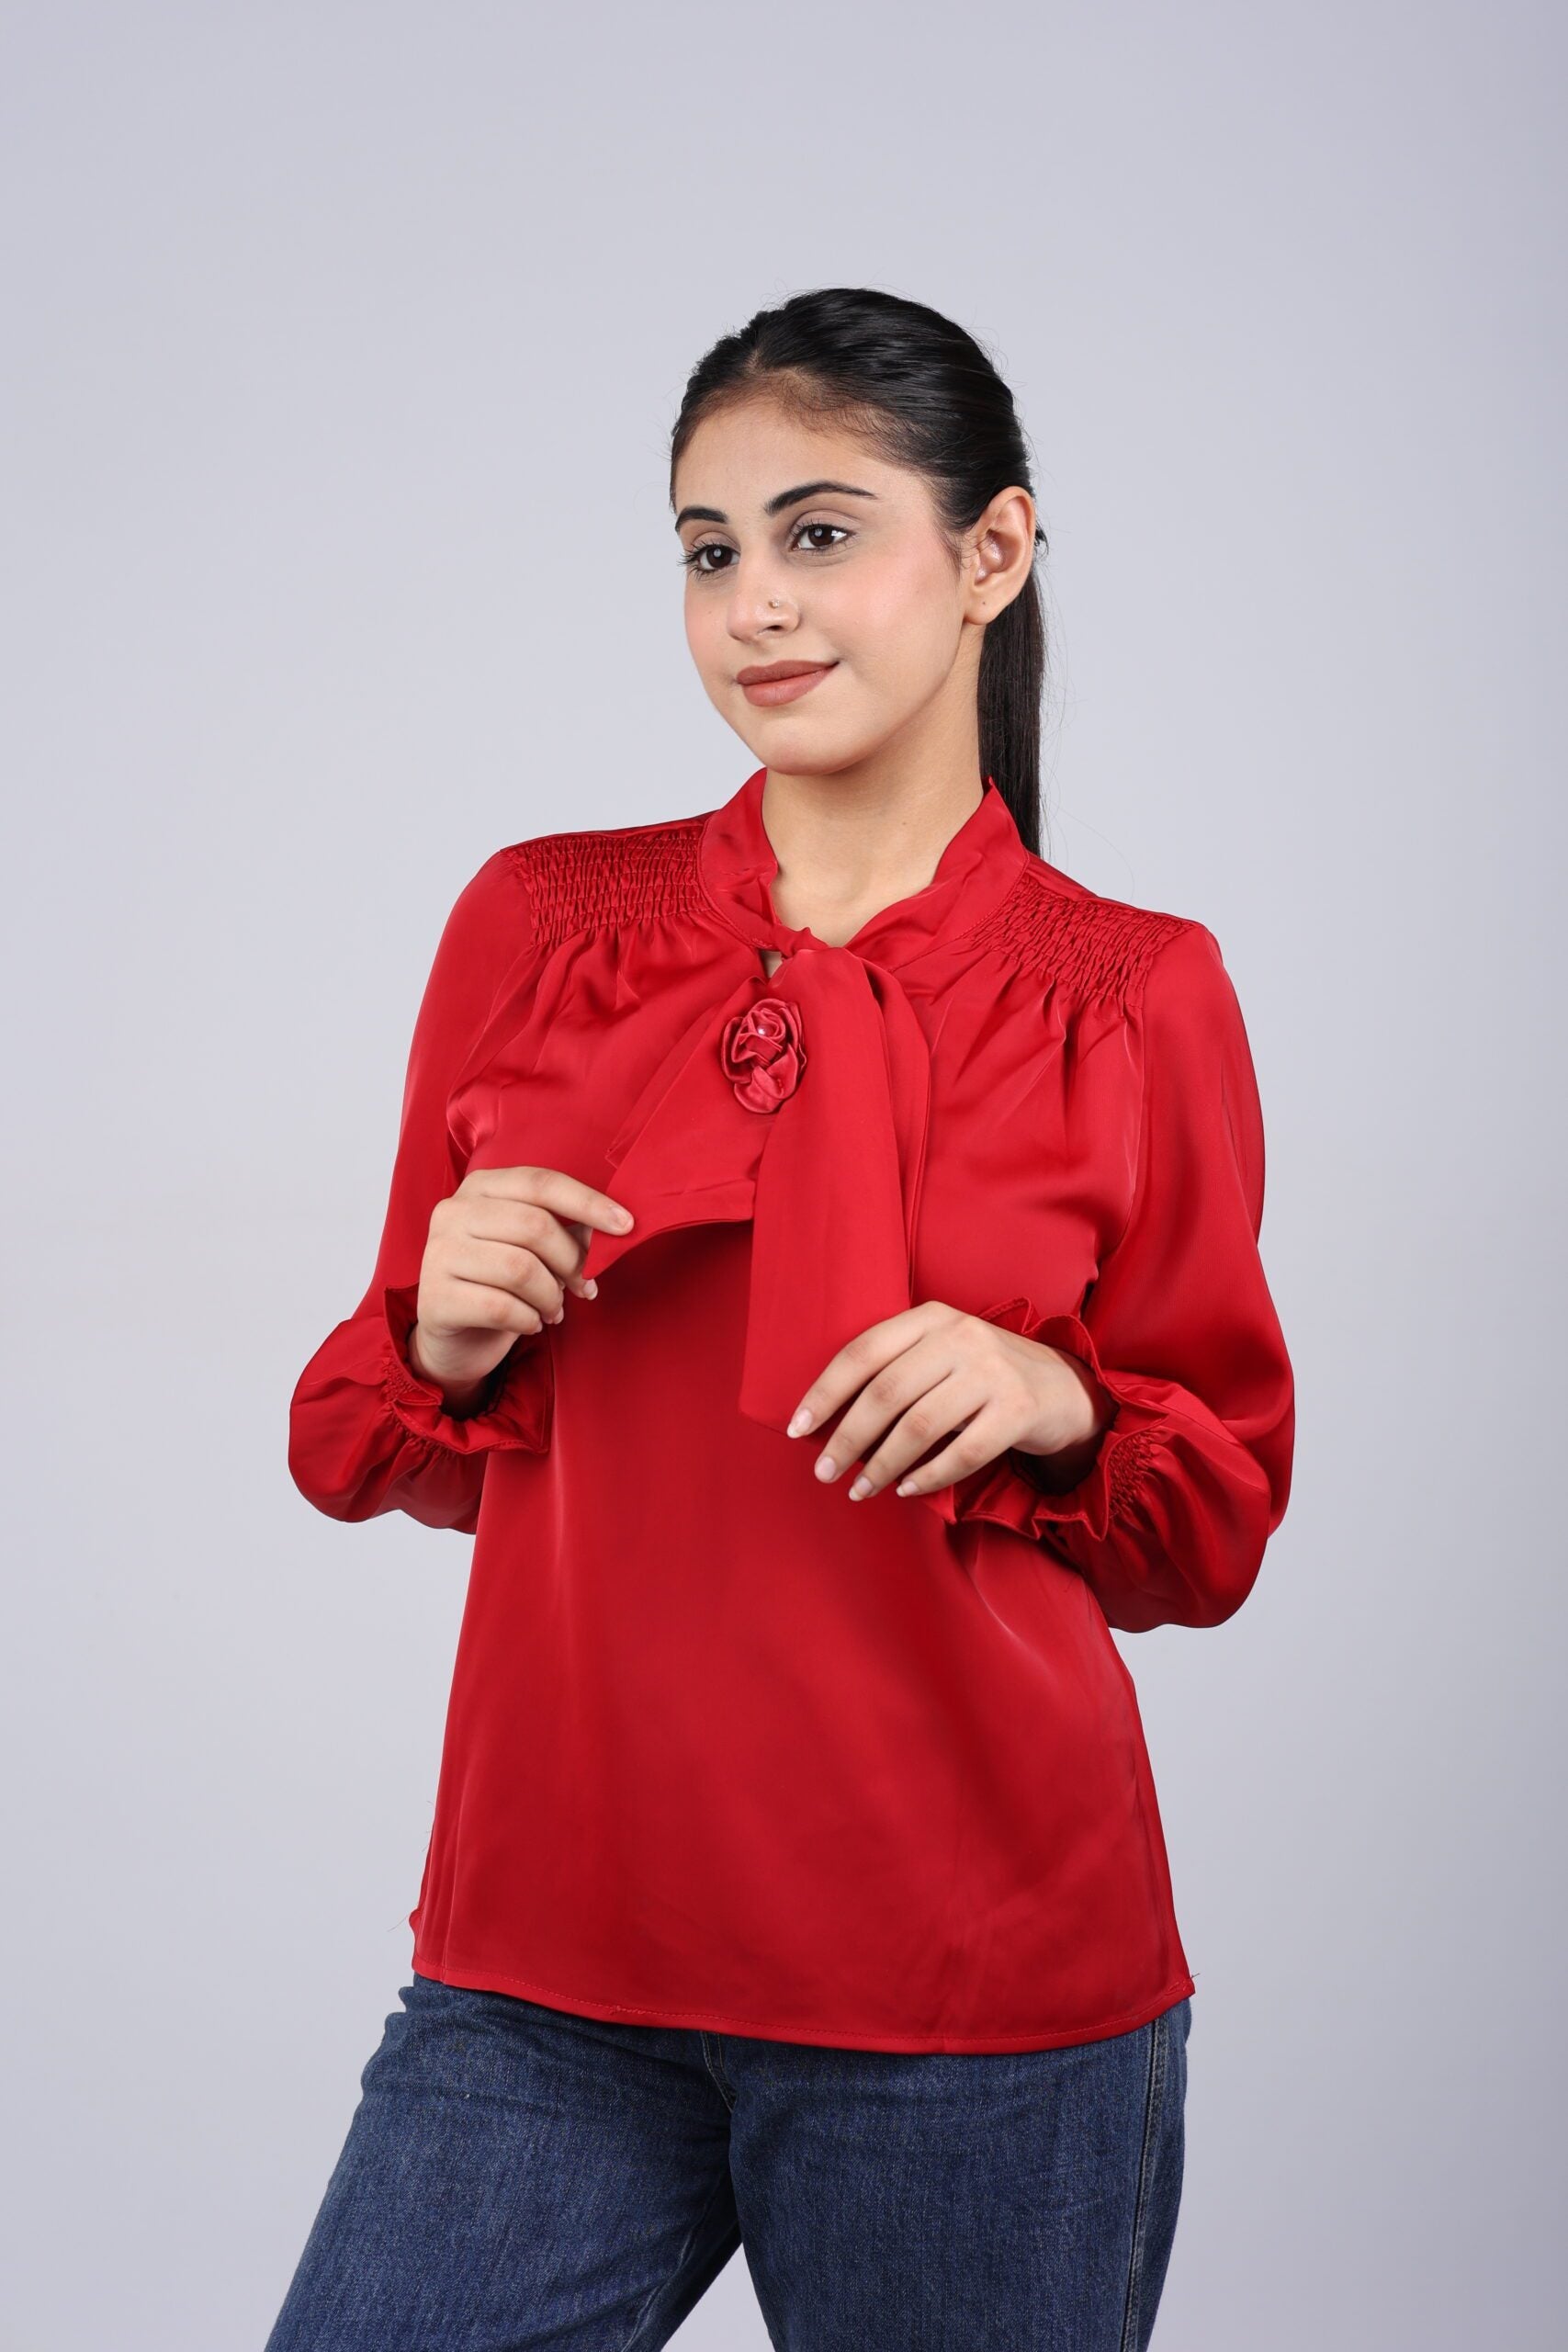 Front Rose Formal/Casual Top (Red) A Stunning Blend of Elegance and Versatility!